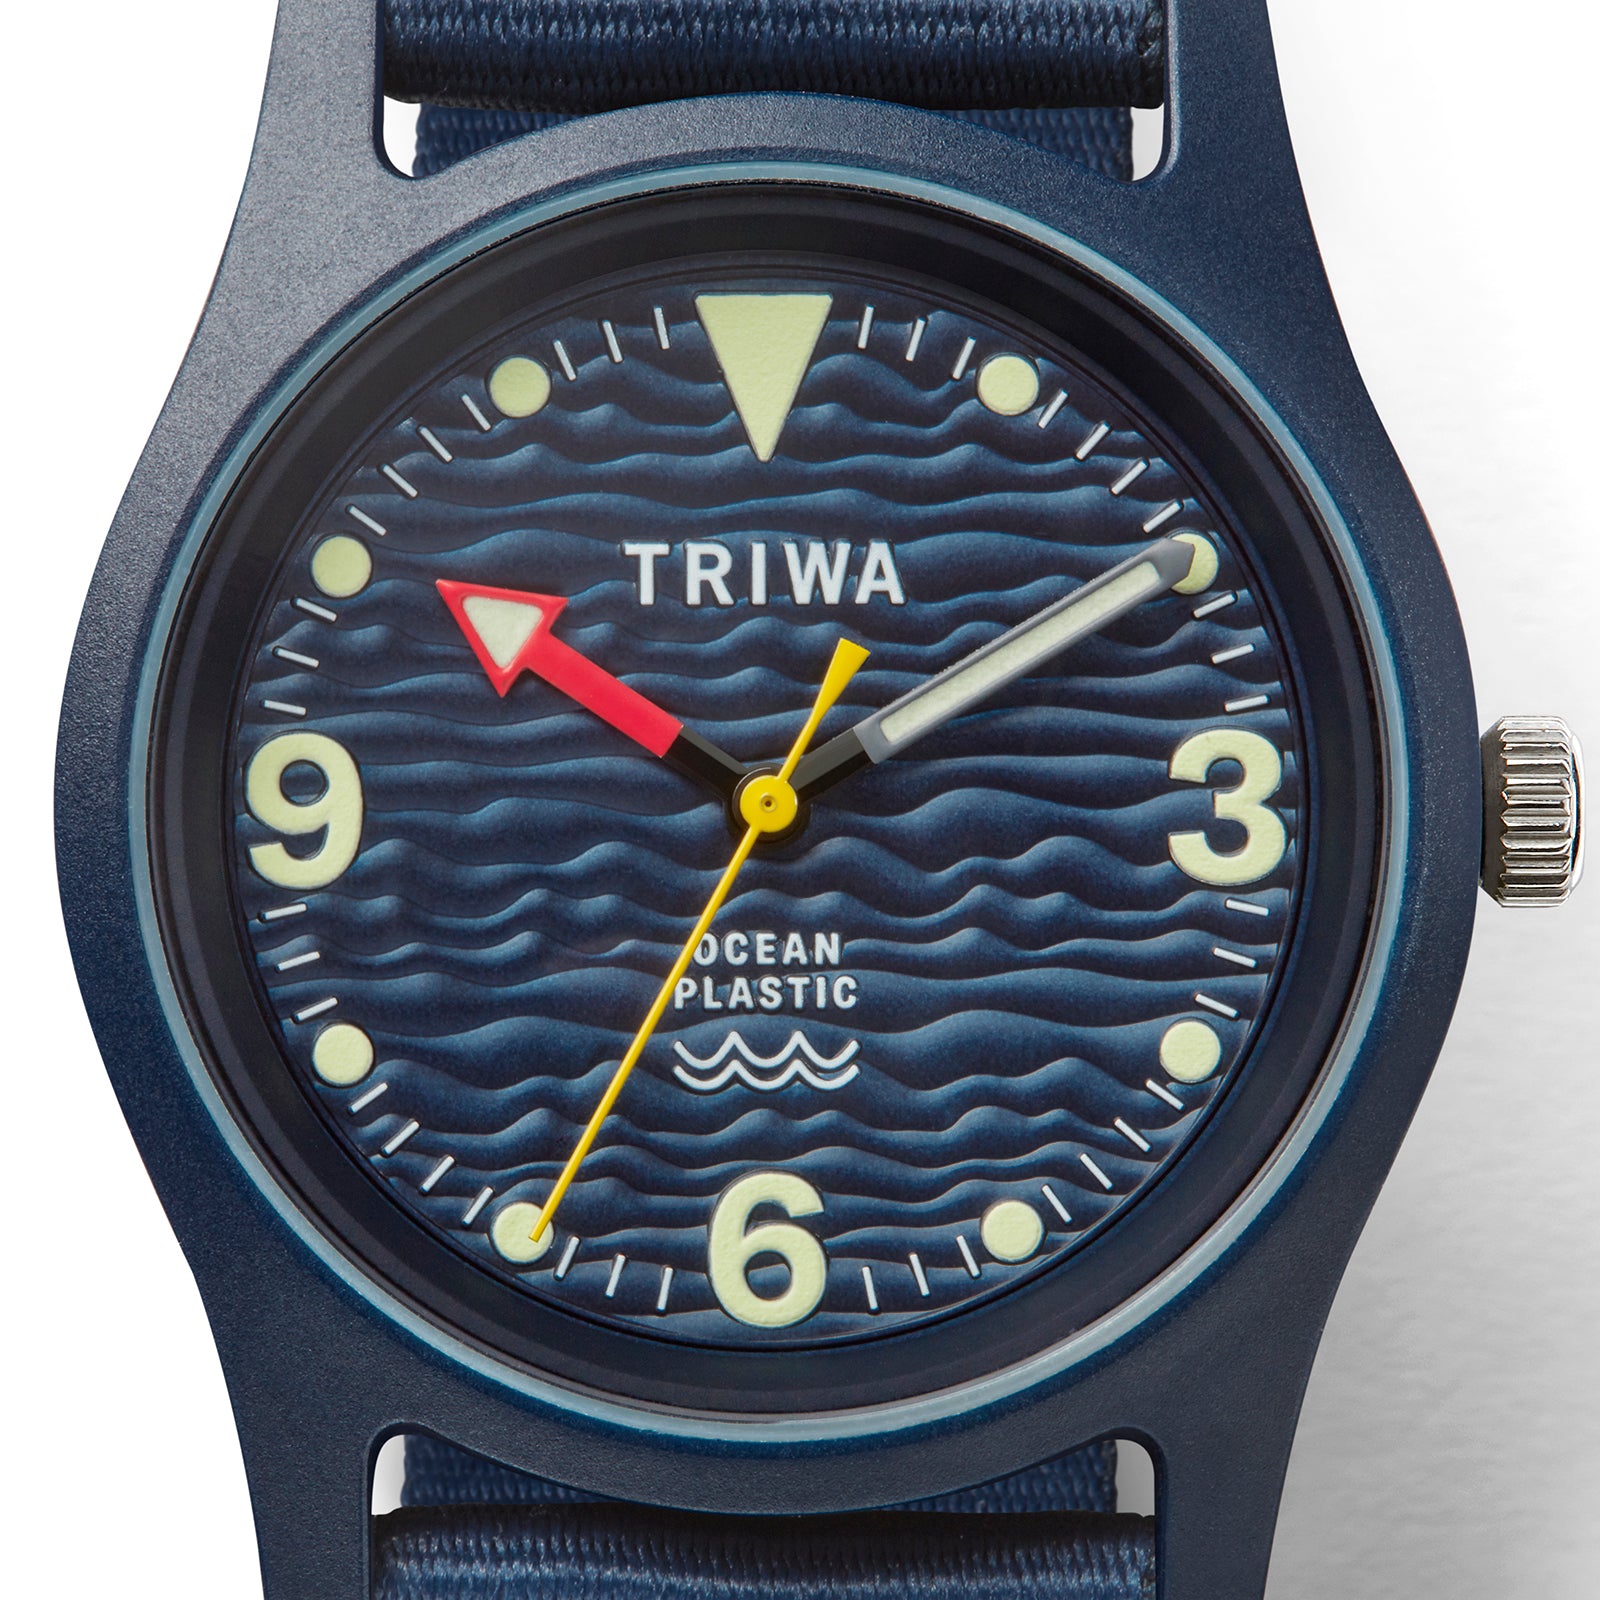 Triwa 'Time for Oceans' Wrist Watch - Recycled Ocean Plastic - Deep Blue